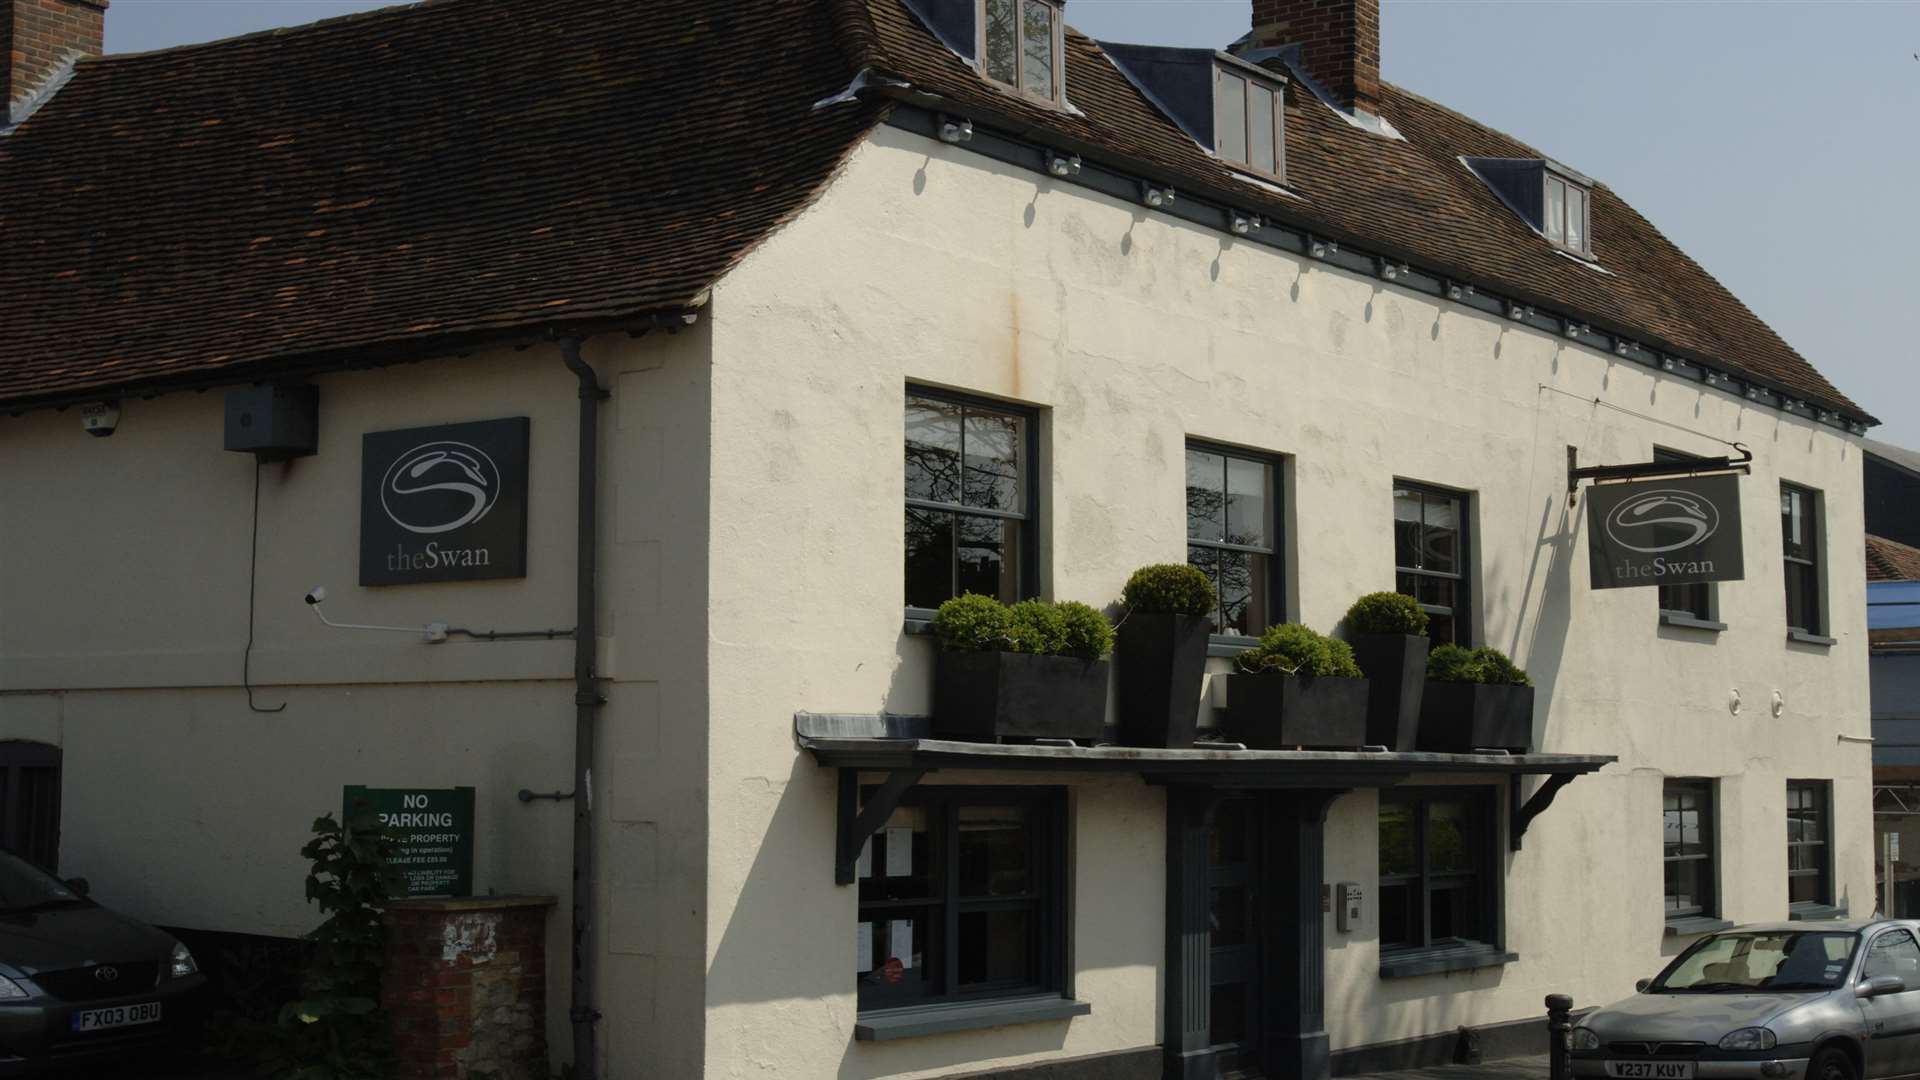 The Swan in West Malling